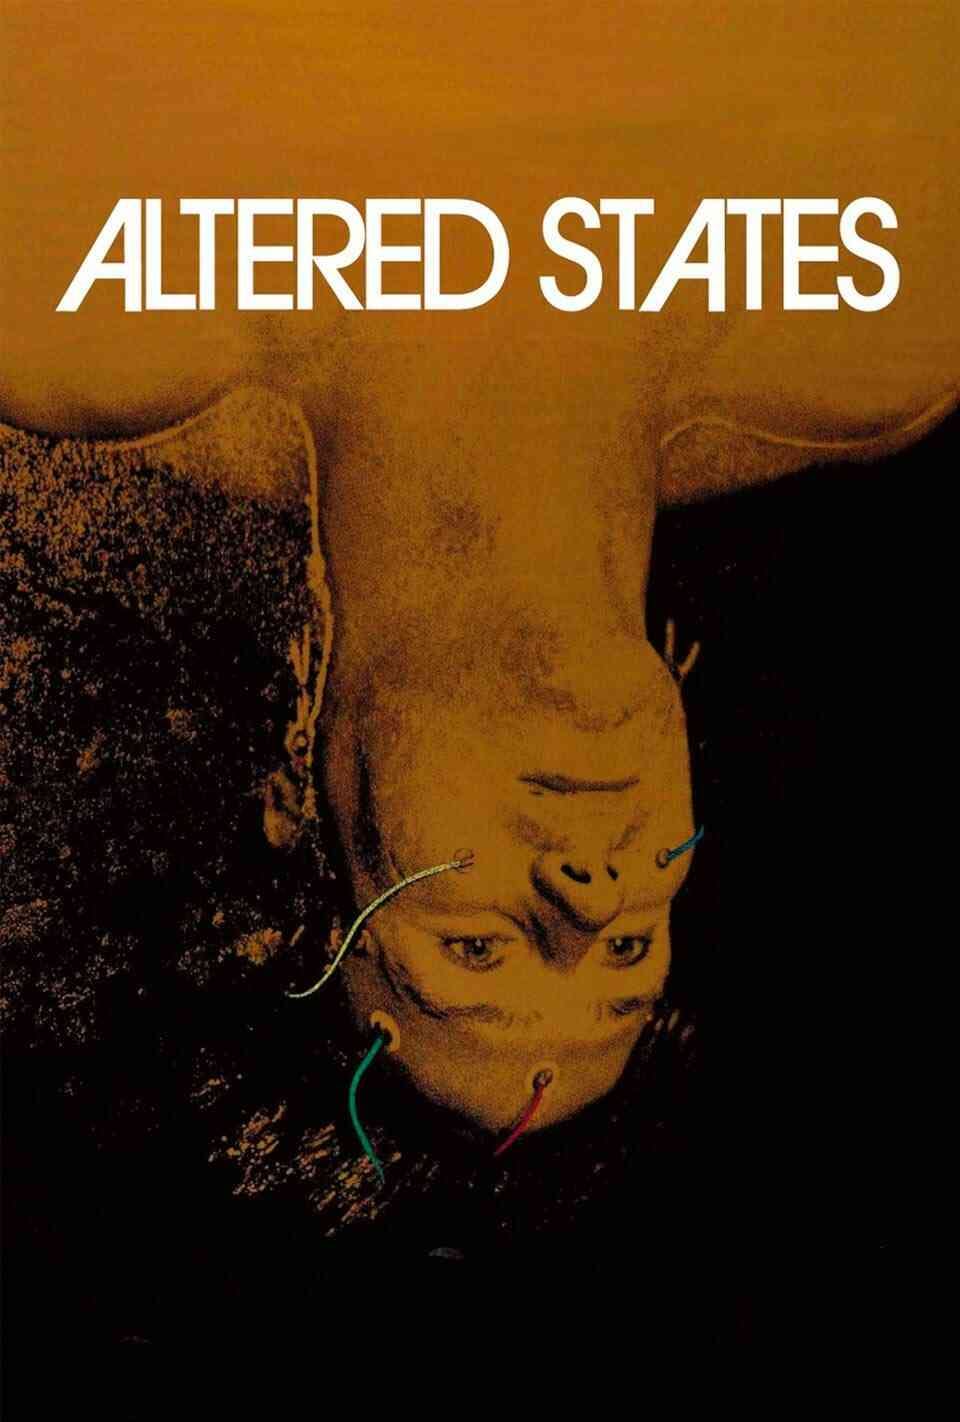 Read Altered States screenplay (poster)